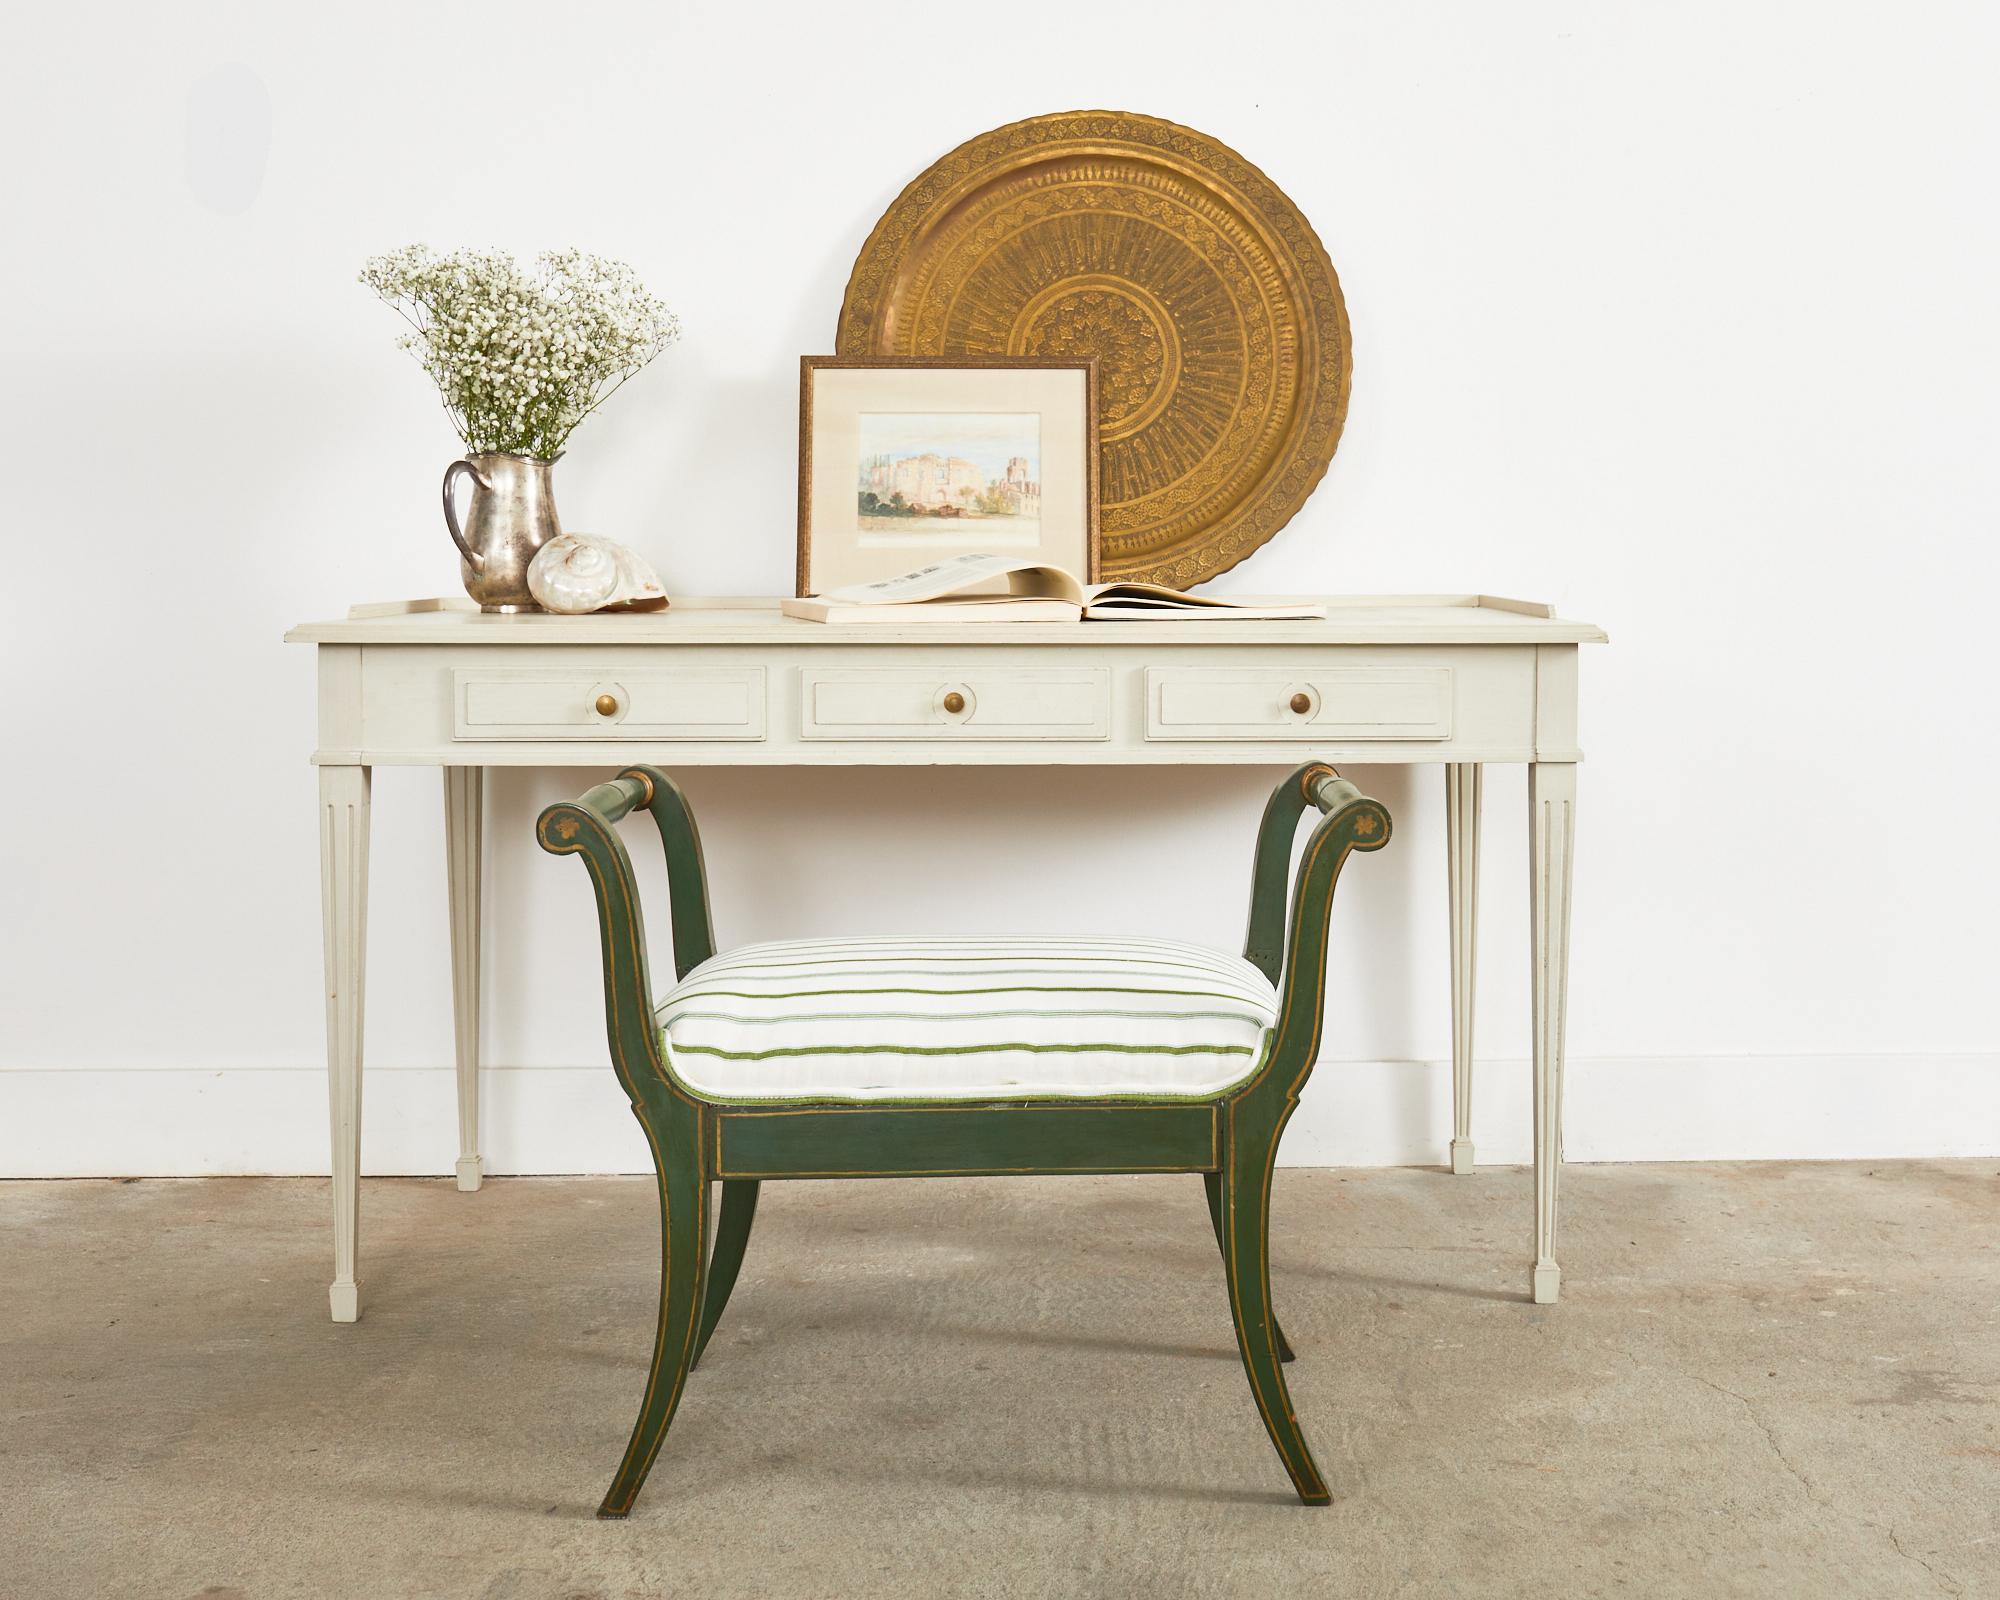 Extraordinary pair of lacquered olive green benches or stools made in the regency taste. The stools feature a gracefully splayed klismos style legs with delicate parcel gilt accents. The newly upholstered seat is topped with a playful green, white,